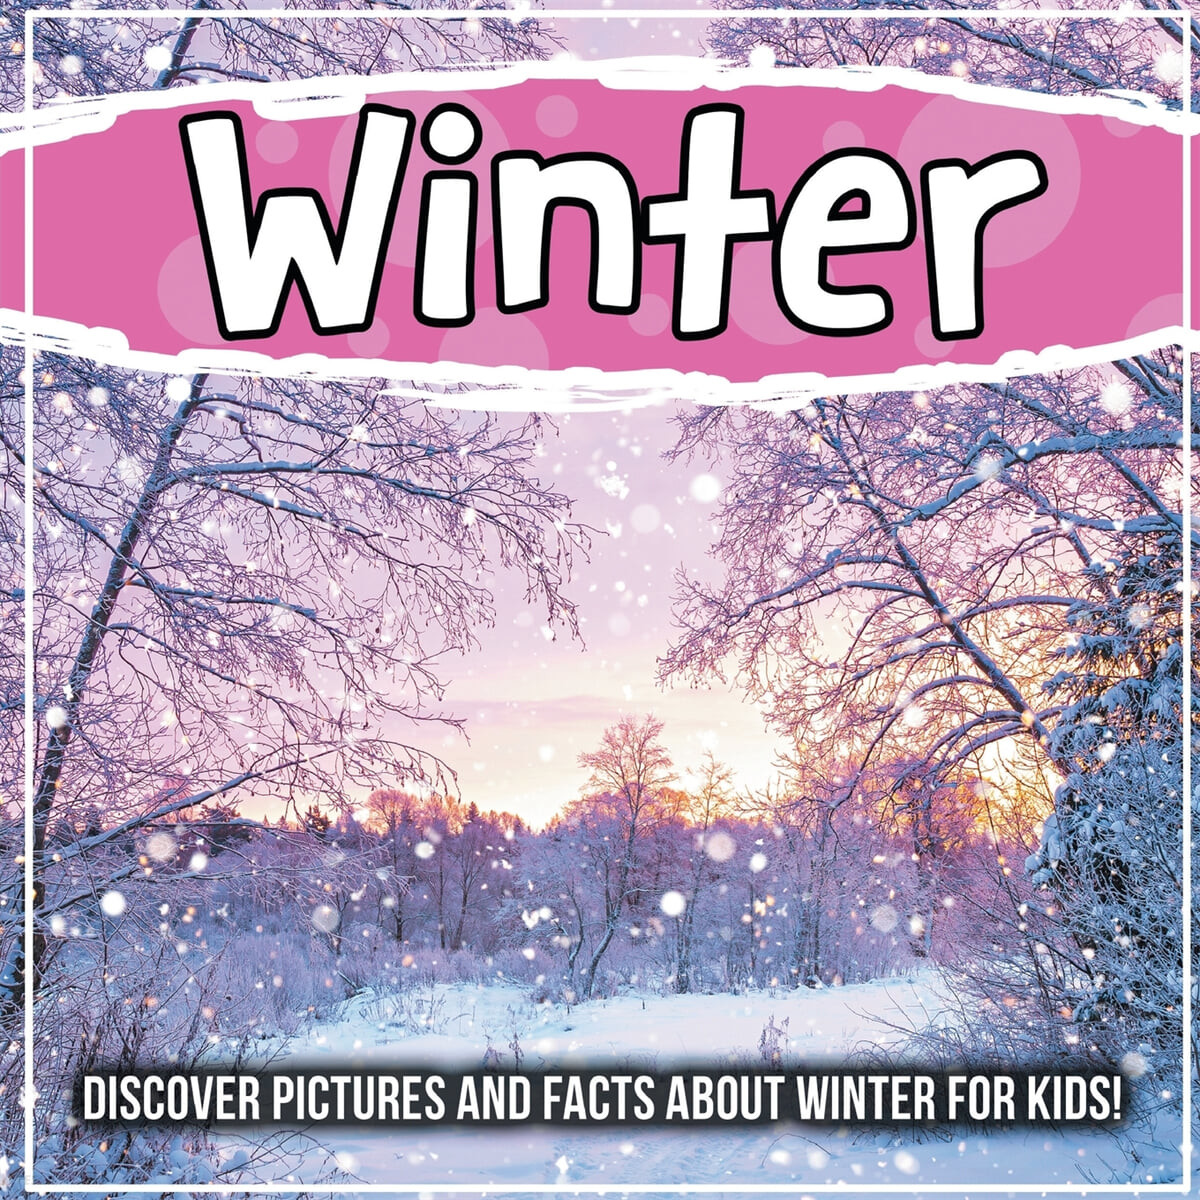 Winter (Discover Pictures and Facts About Winter For Kids!)